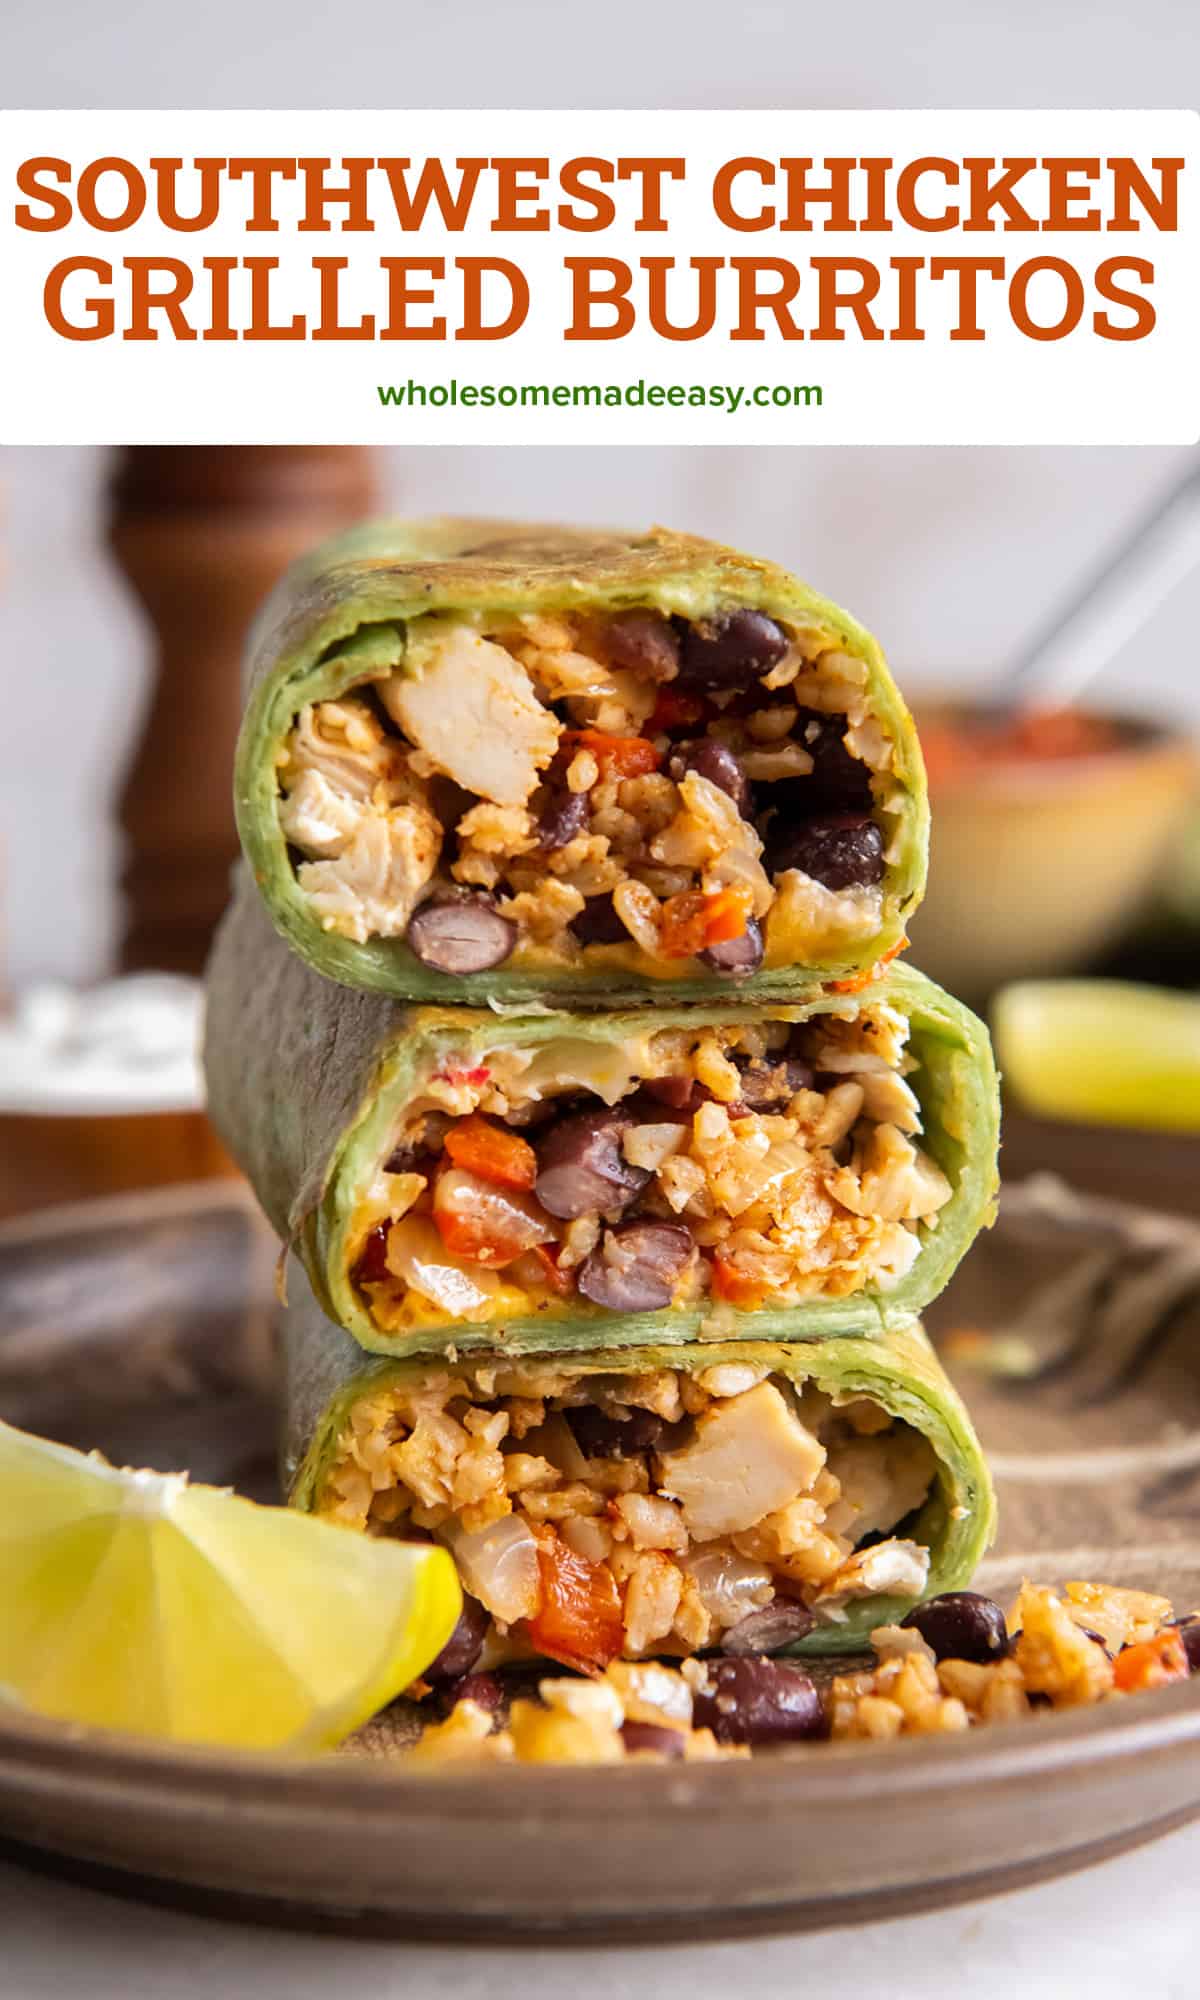 A stack of halved burritos in green tortillas revealing the filling of rice, black beans, red bell peppers, and chicken with text.